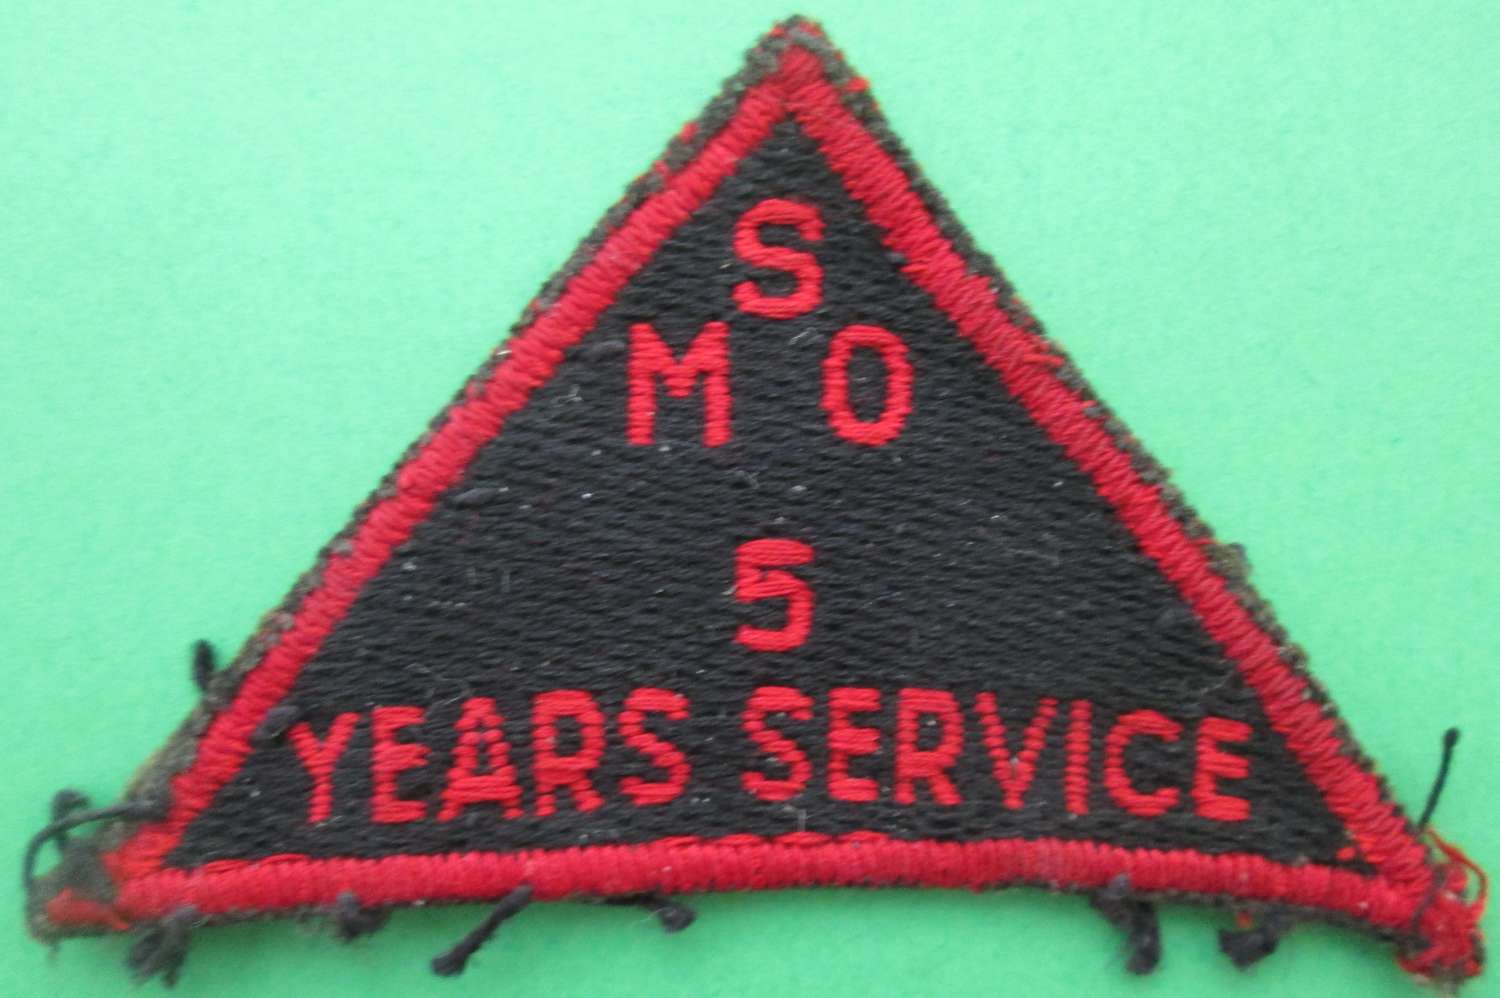 MIXED SERVICE ORGANISATION 5 YEARS SERVICE BADGE